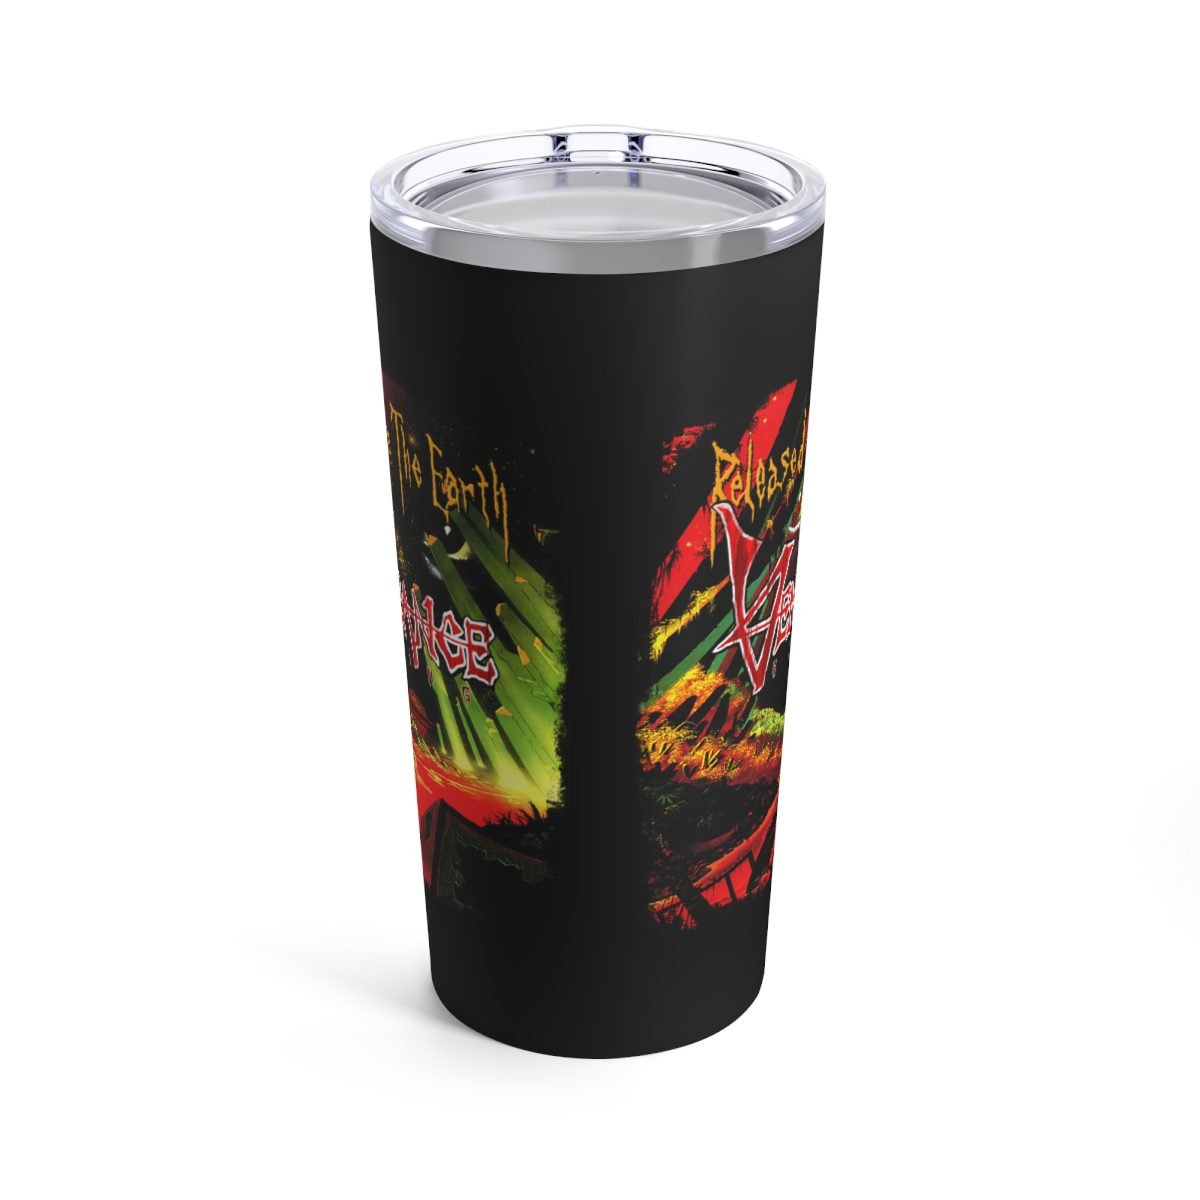 Vengeance Rising – Released Upon The Earth 20oz Stainless Steel Tumbler